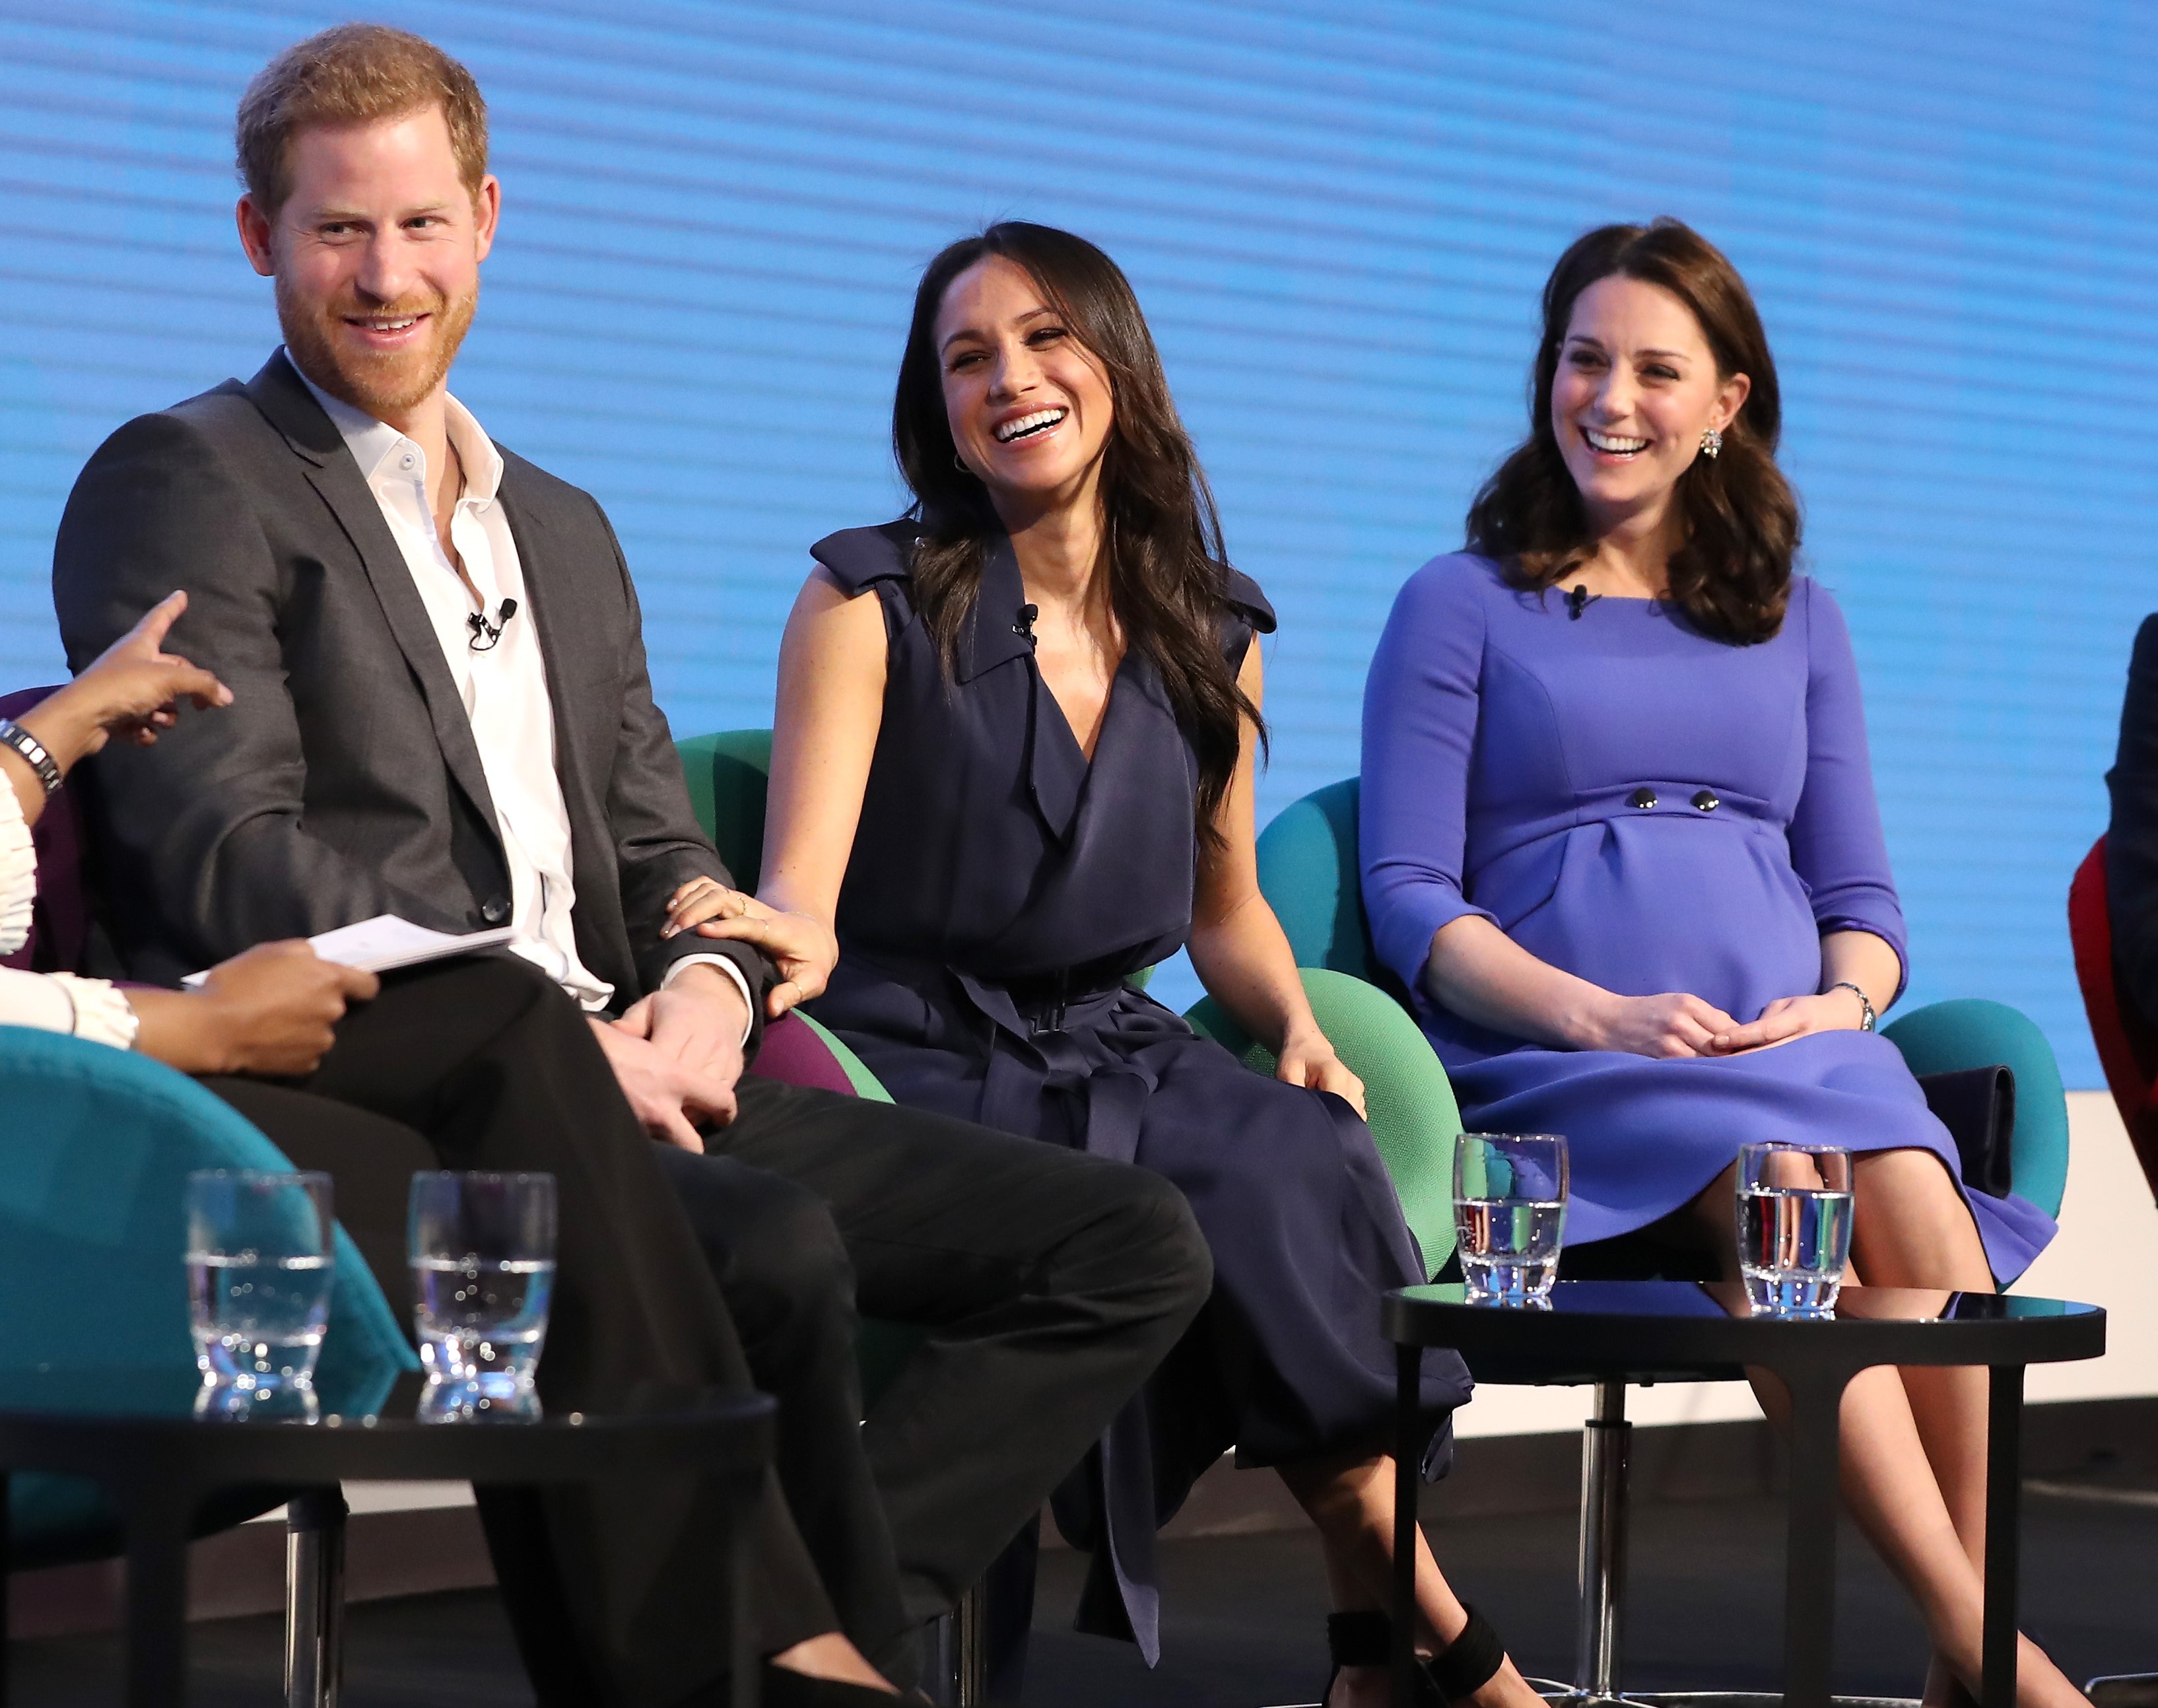 Prince Harry, Meghan Markle, and Kate Middleton sitting onstage together at the Royal Foundation Forum